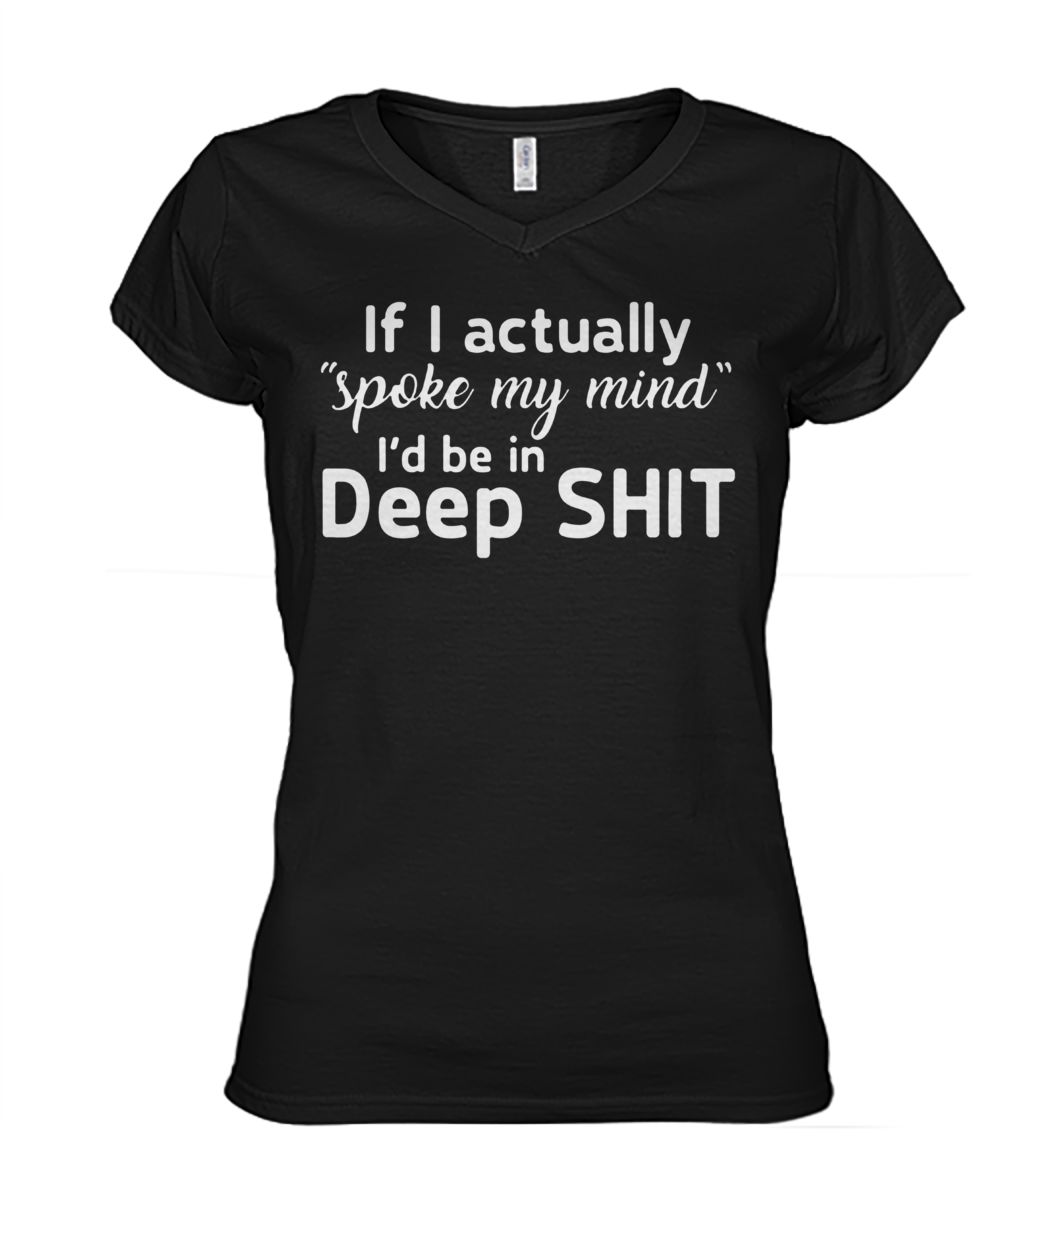 If I actually spoke my mind I'd be in deep shit women's v-neck